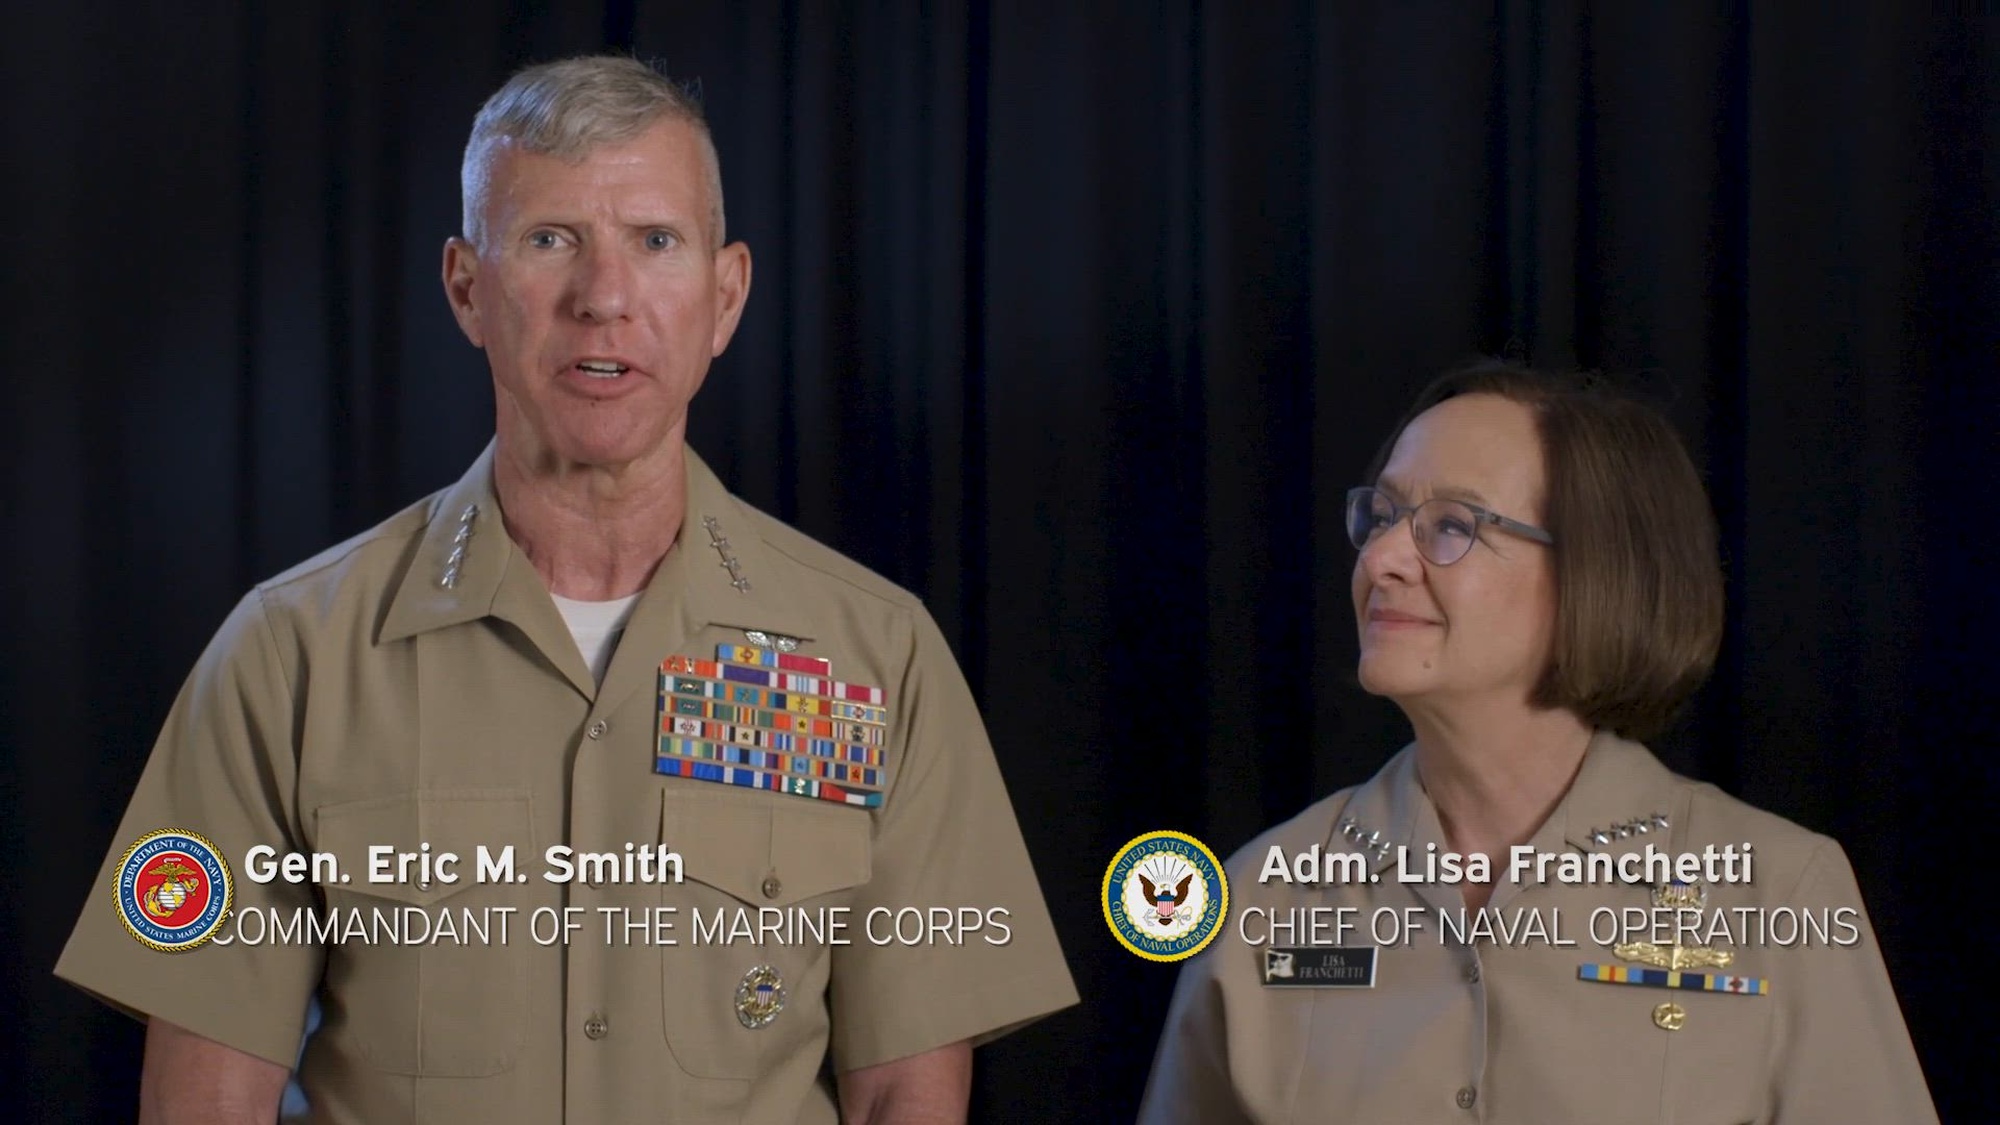 Marine Corps Commandant Gen. Eric Smith and Chief of Naval Operations Adm. Lisa Franchetti discuss the Memorandum of Understanding they both signed last week, which clearly defines the readiness levels and availability of amphibious warships. The MOU allows the Navy-Marine Corps team to share a common understanding on when amphibious ships are ready to support operations and training. (U.S. Marine Corps video by Sgt Aldo Sessarego)